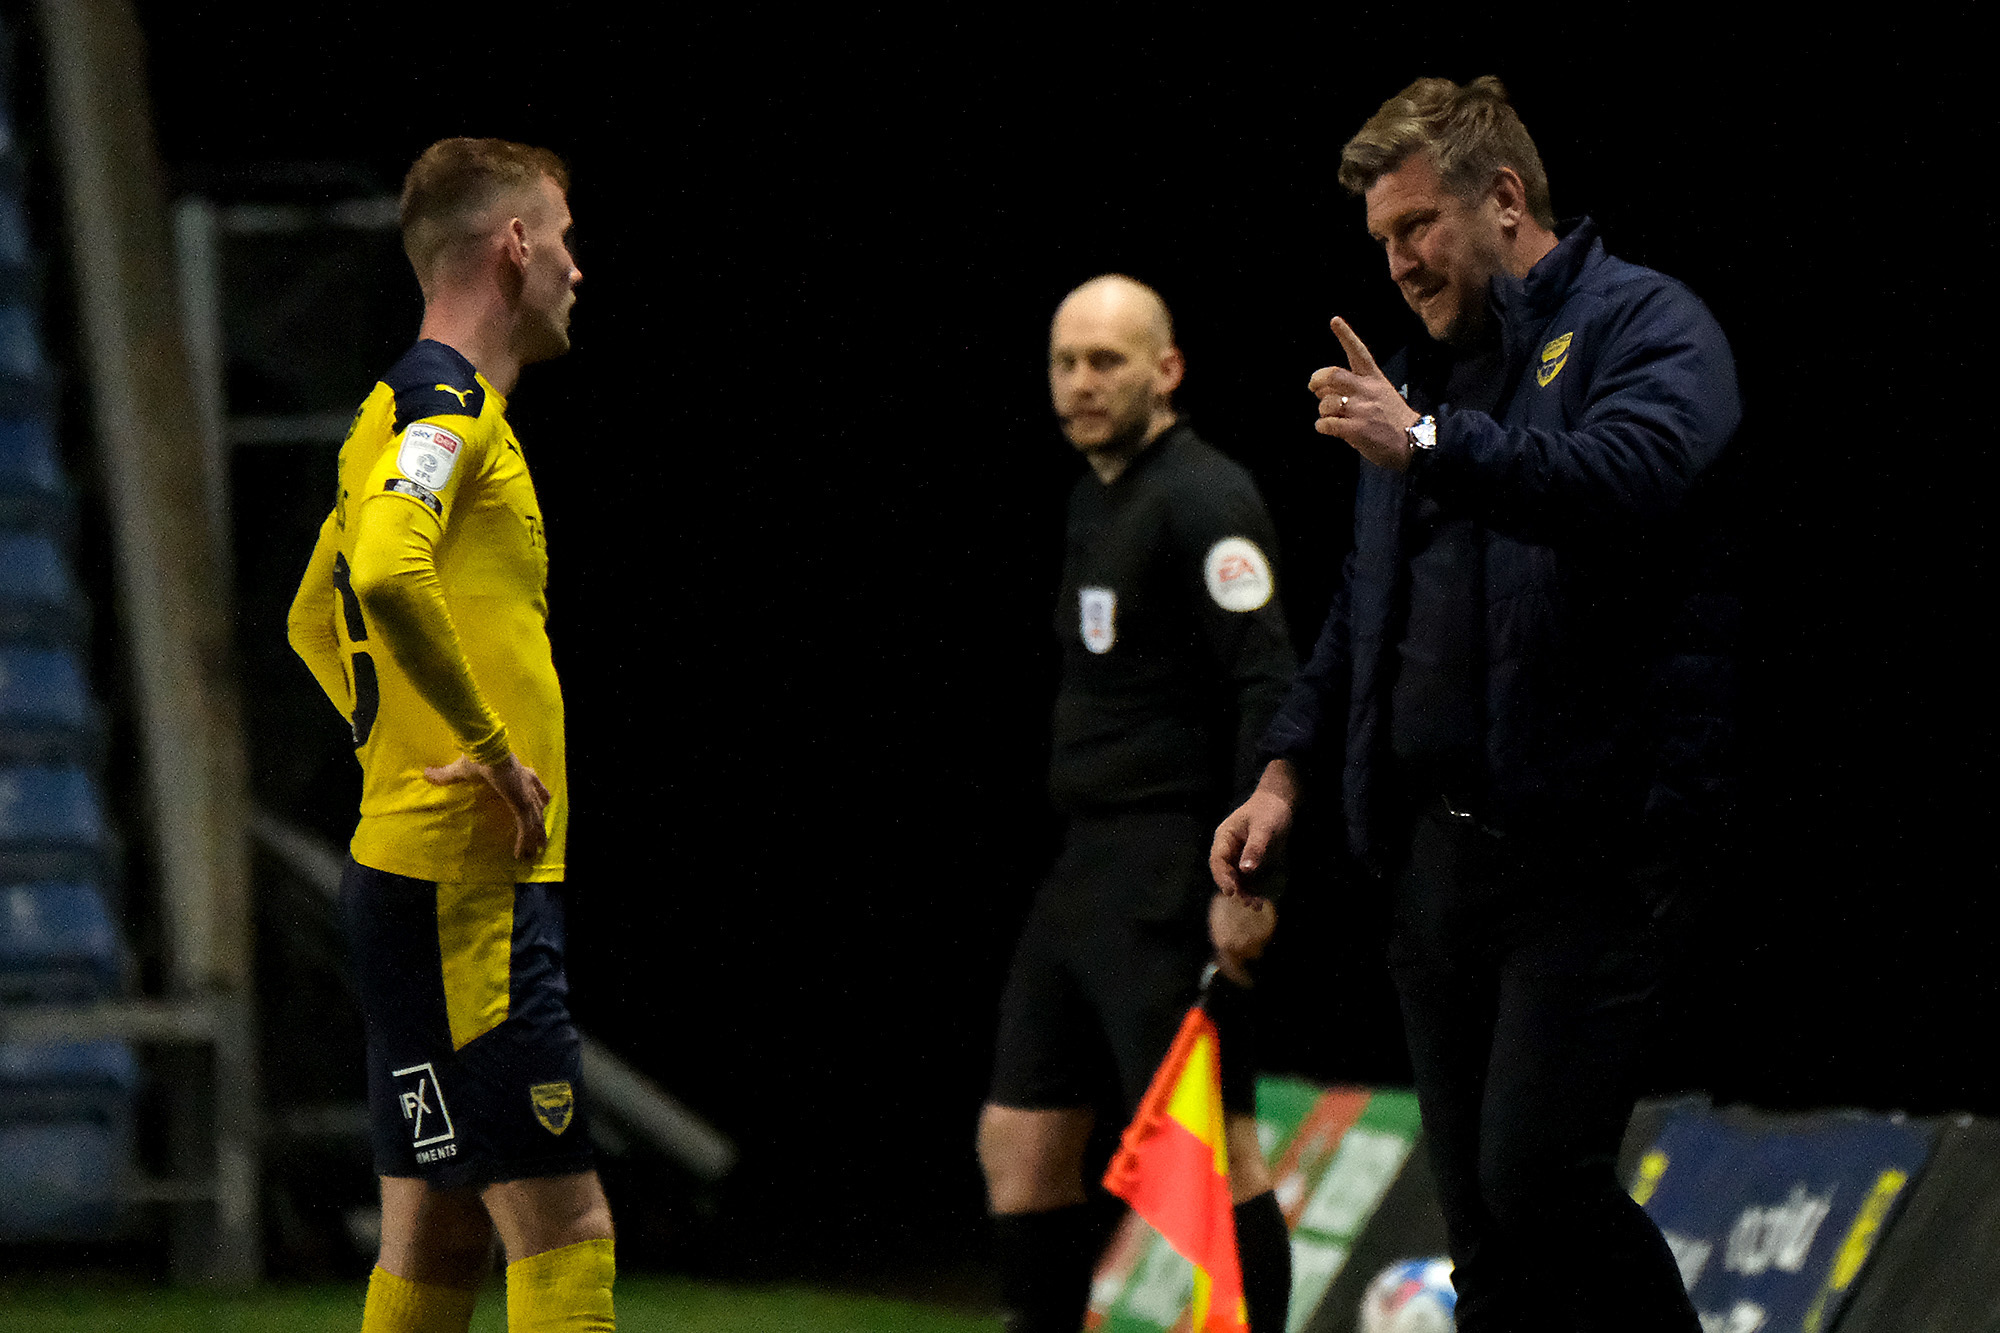 Oxford United boss Karl Robinson on play-off challenge